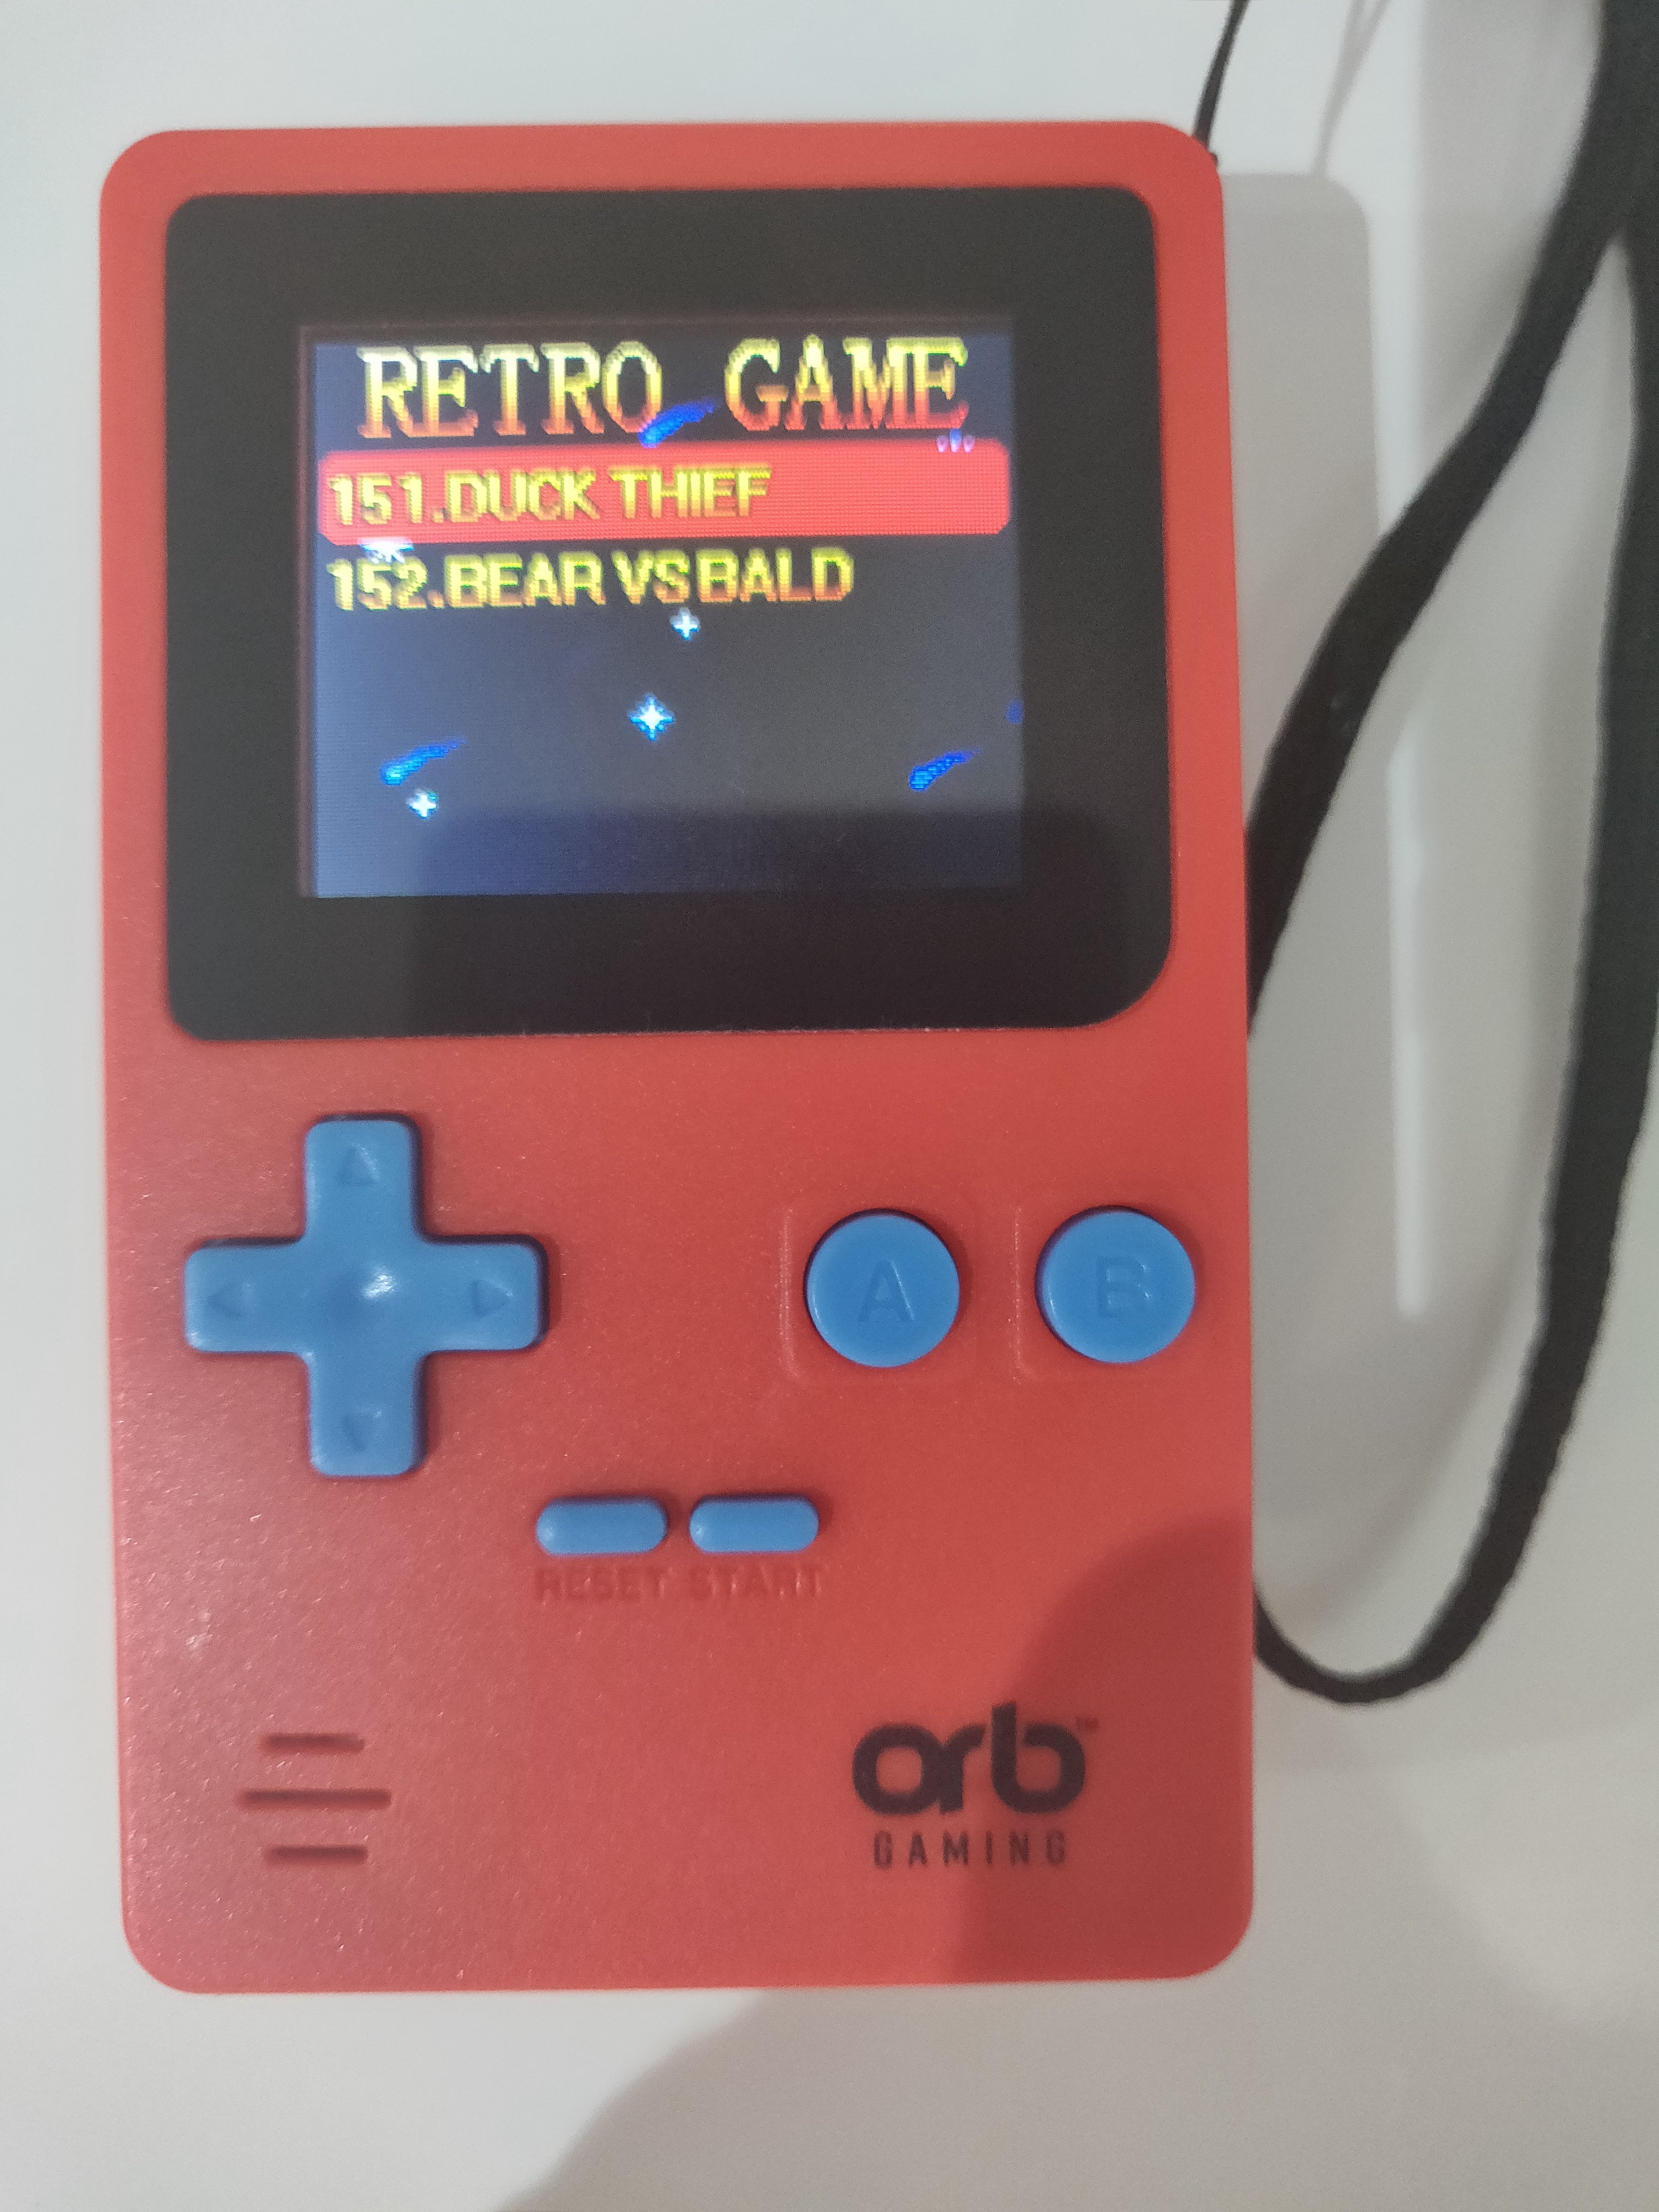 orb gaming retro handheld console game list